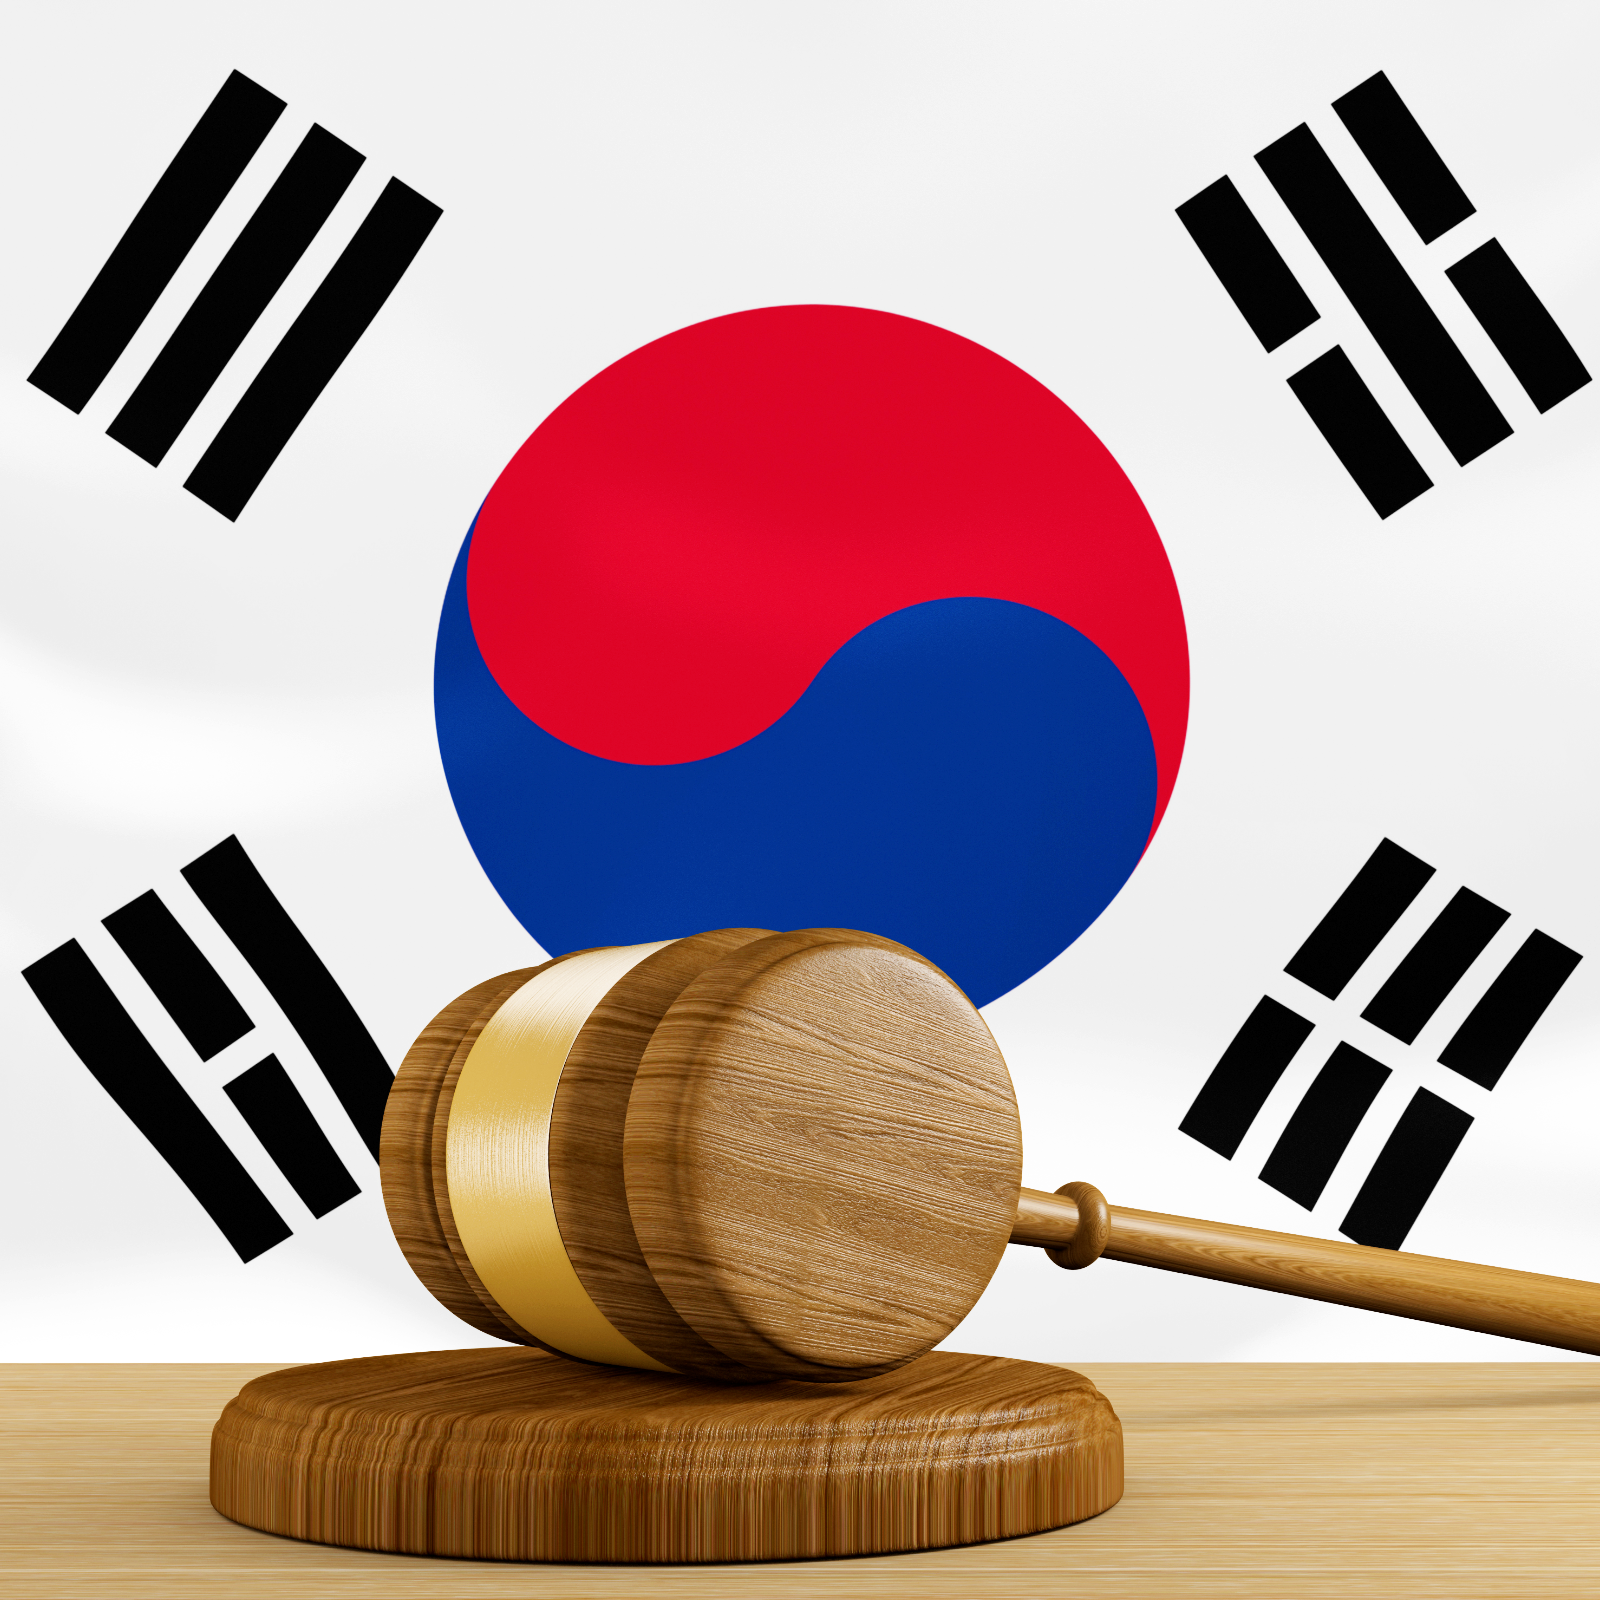 Korean Court Case Alleges Government's ICO Ban Is Unconstitutional